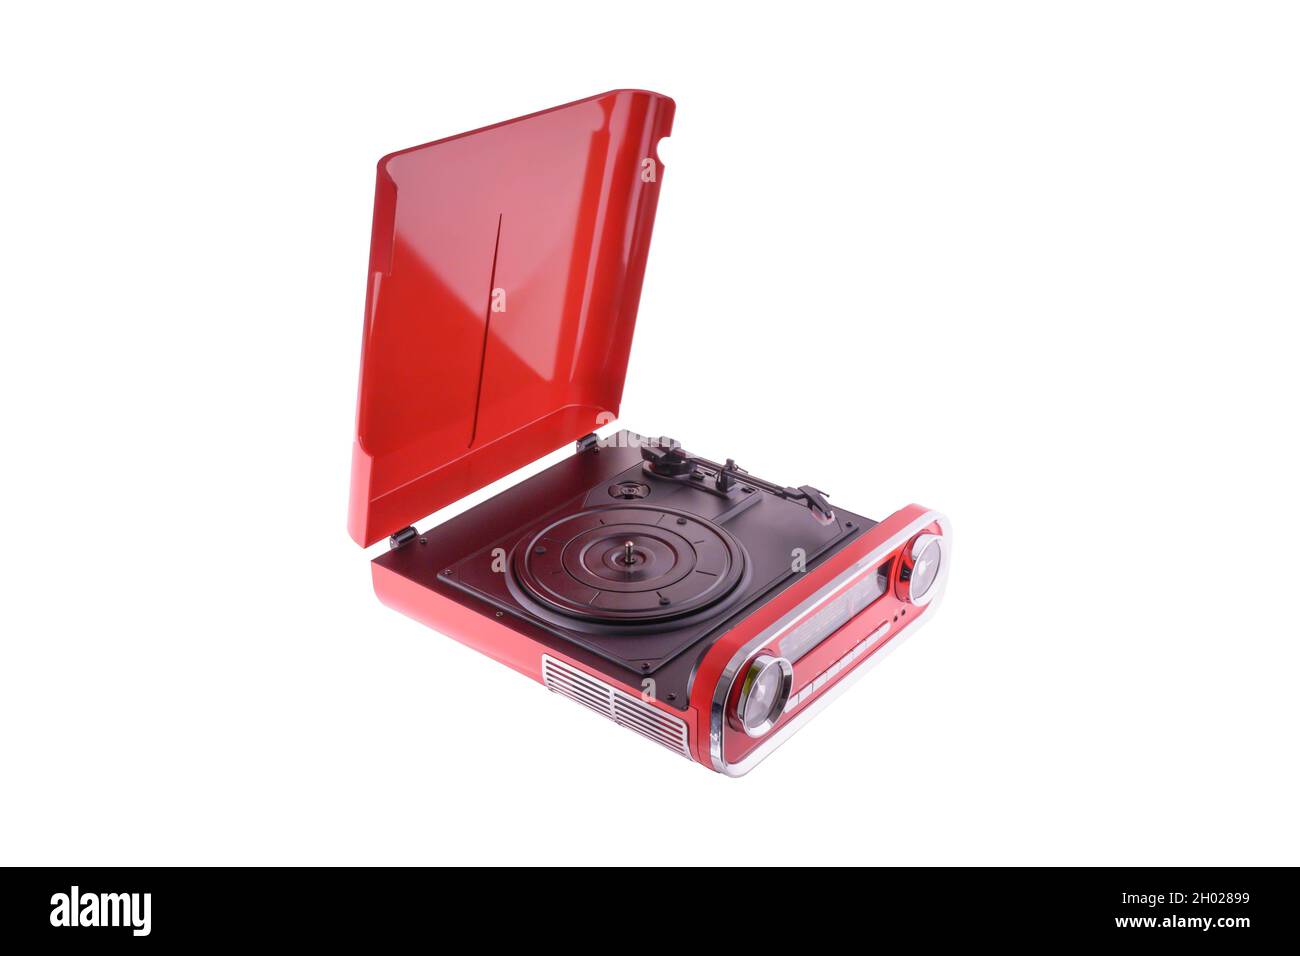 vintage flame red turntable on white background Stock Photo